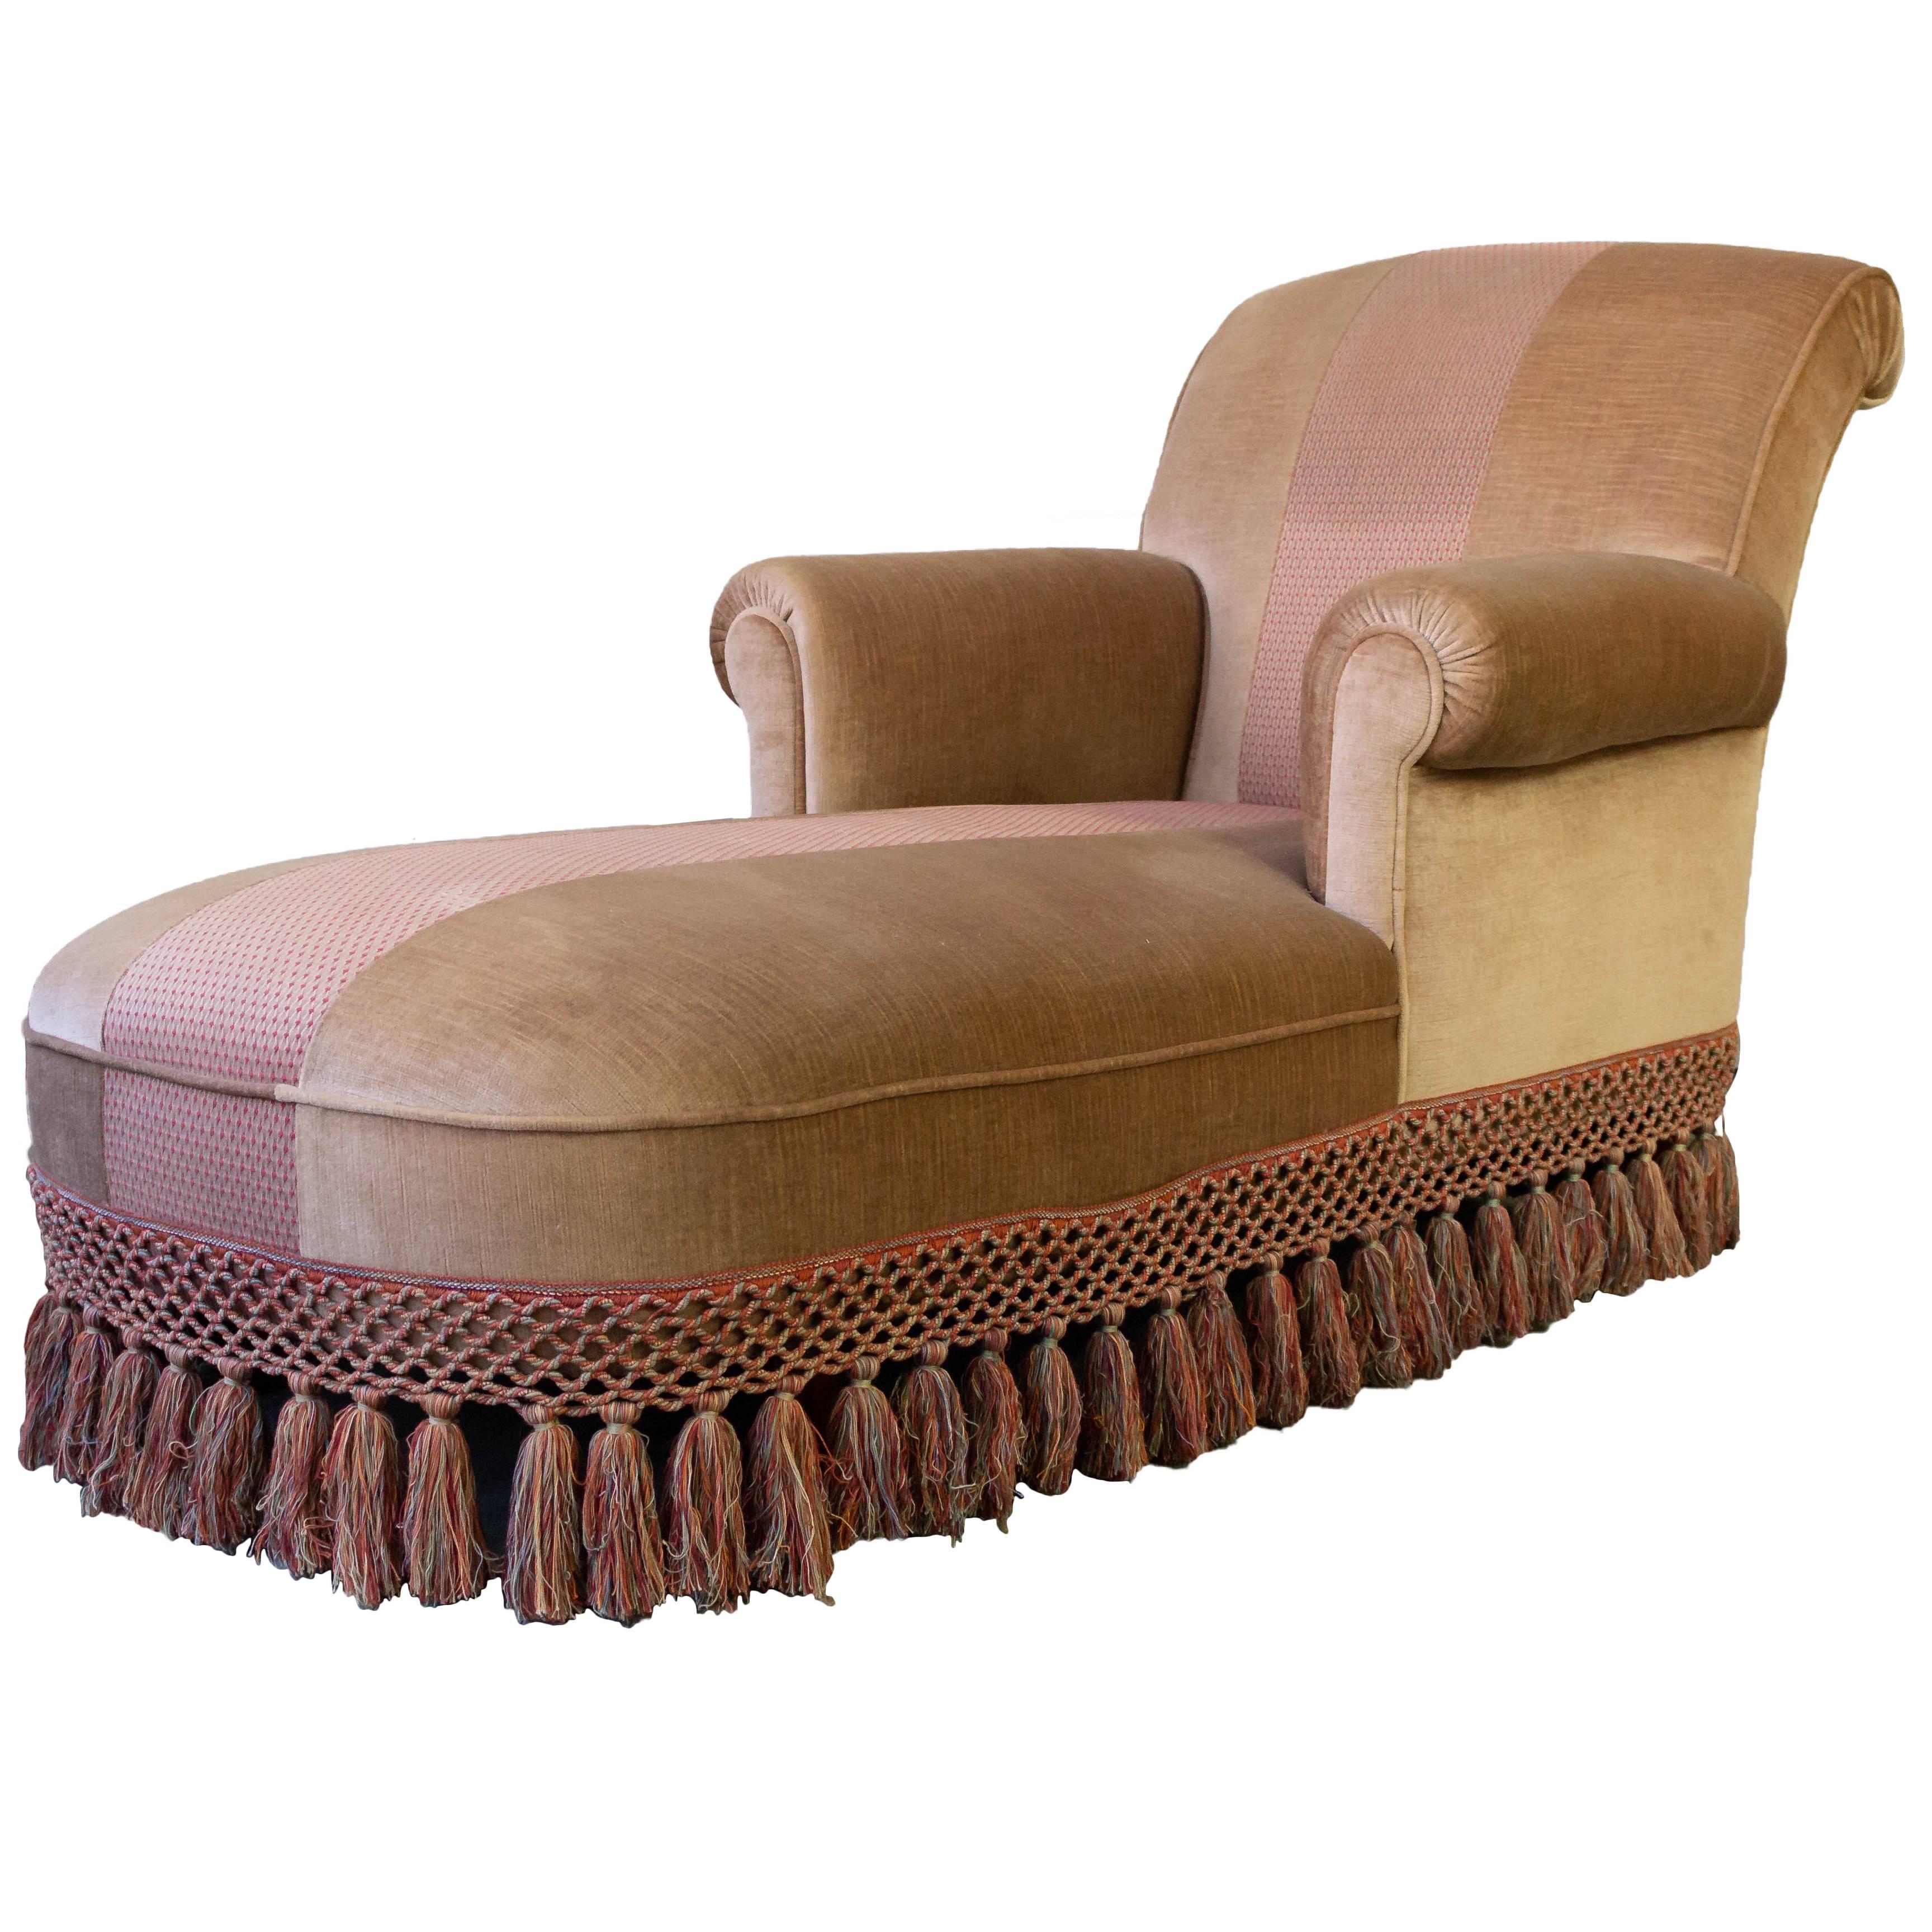 Chaise Longue With Contrasting Fabric and Trim